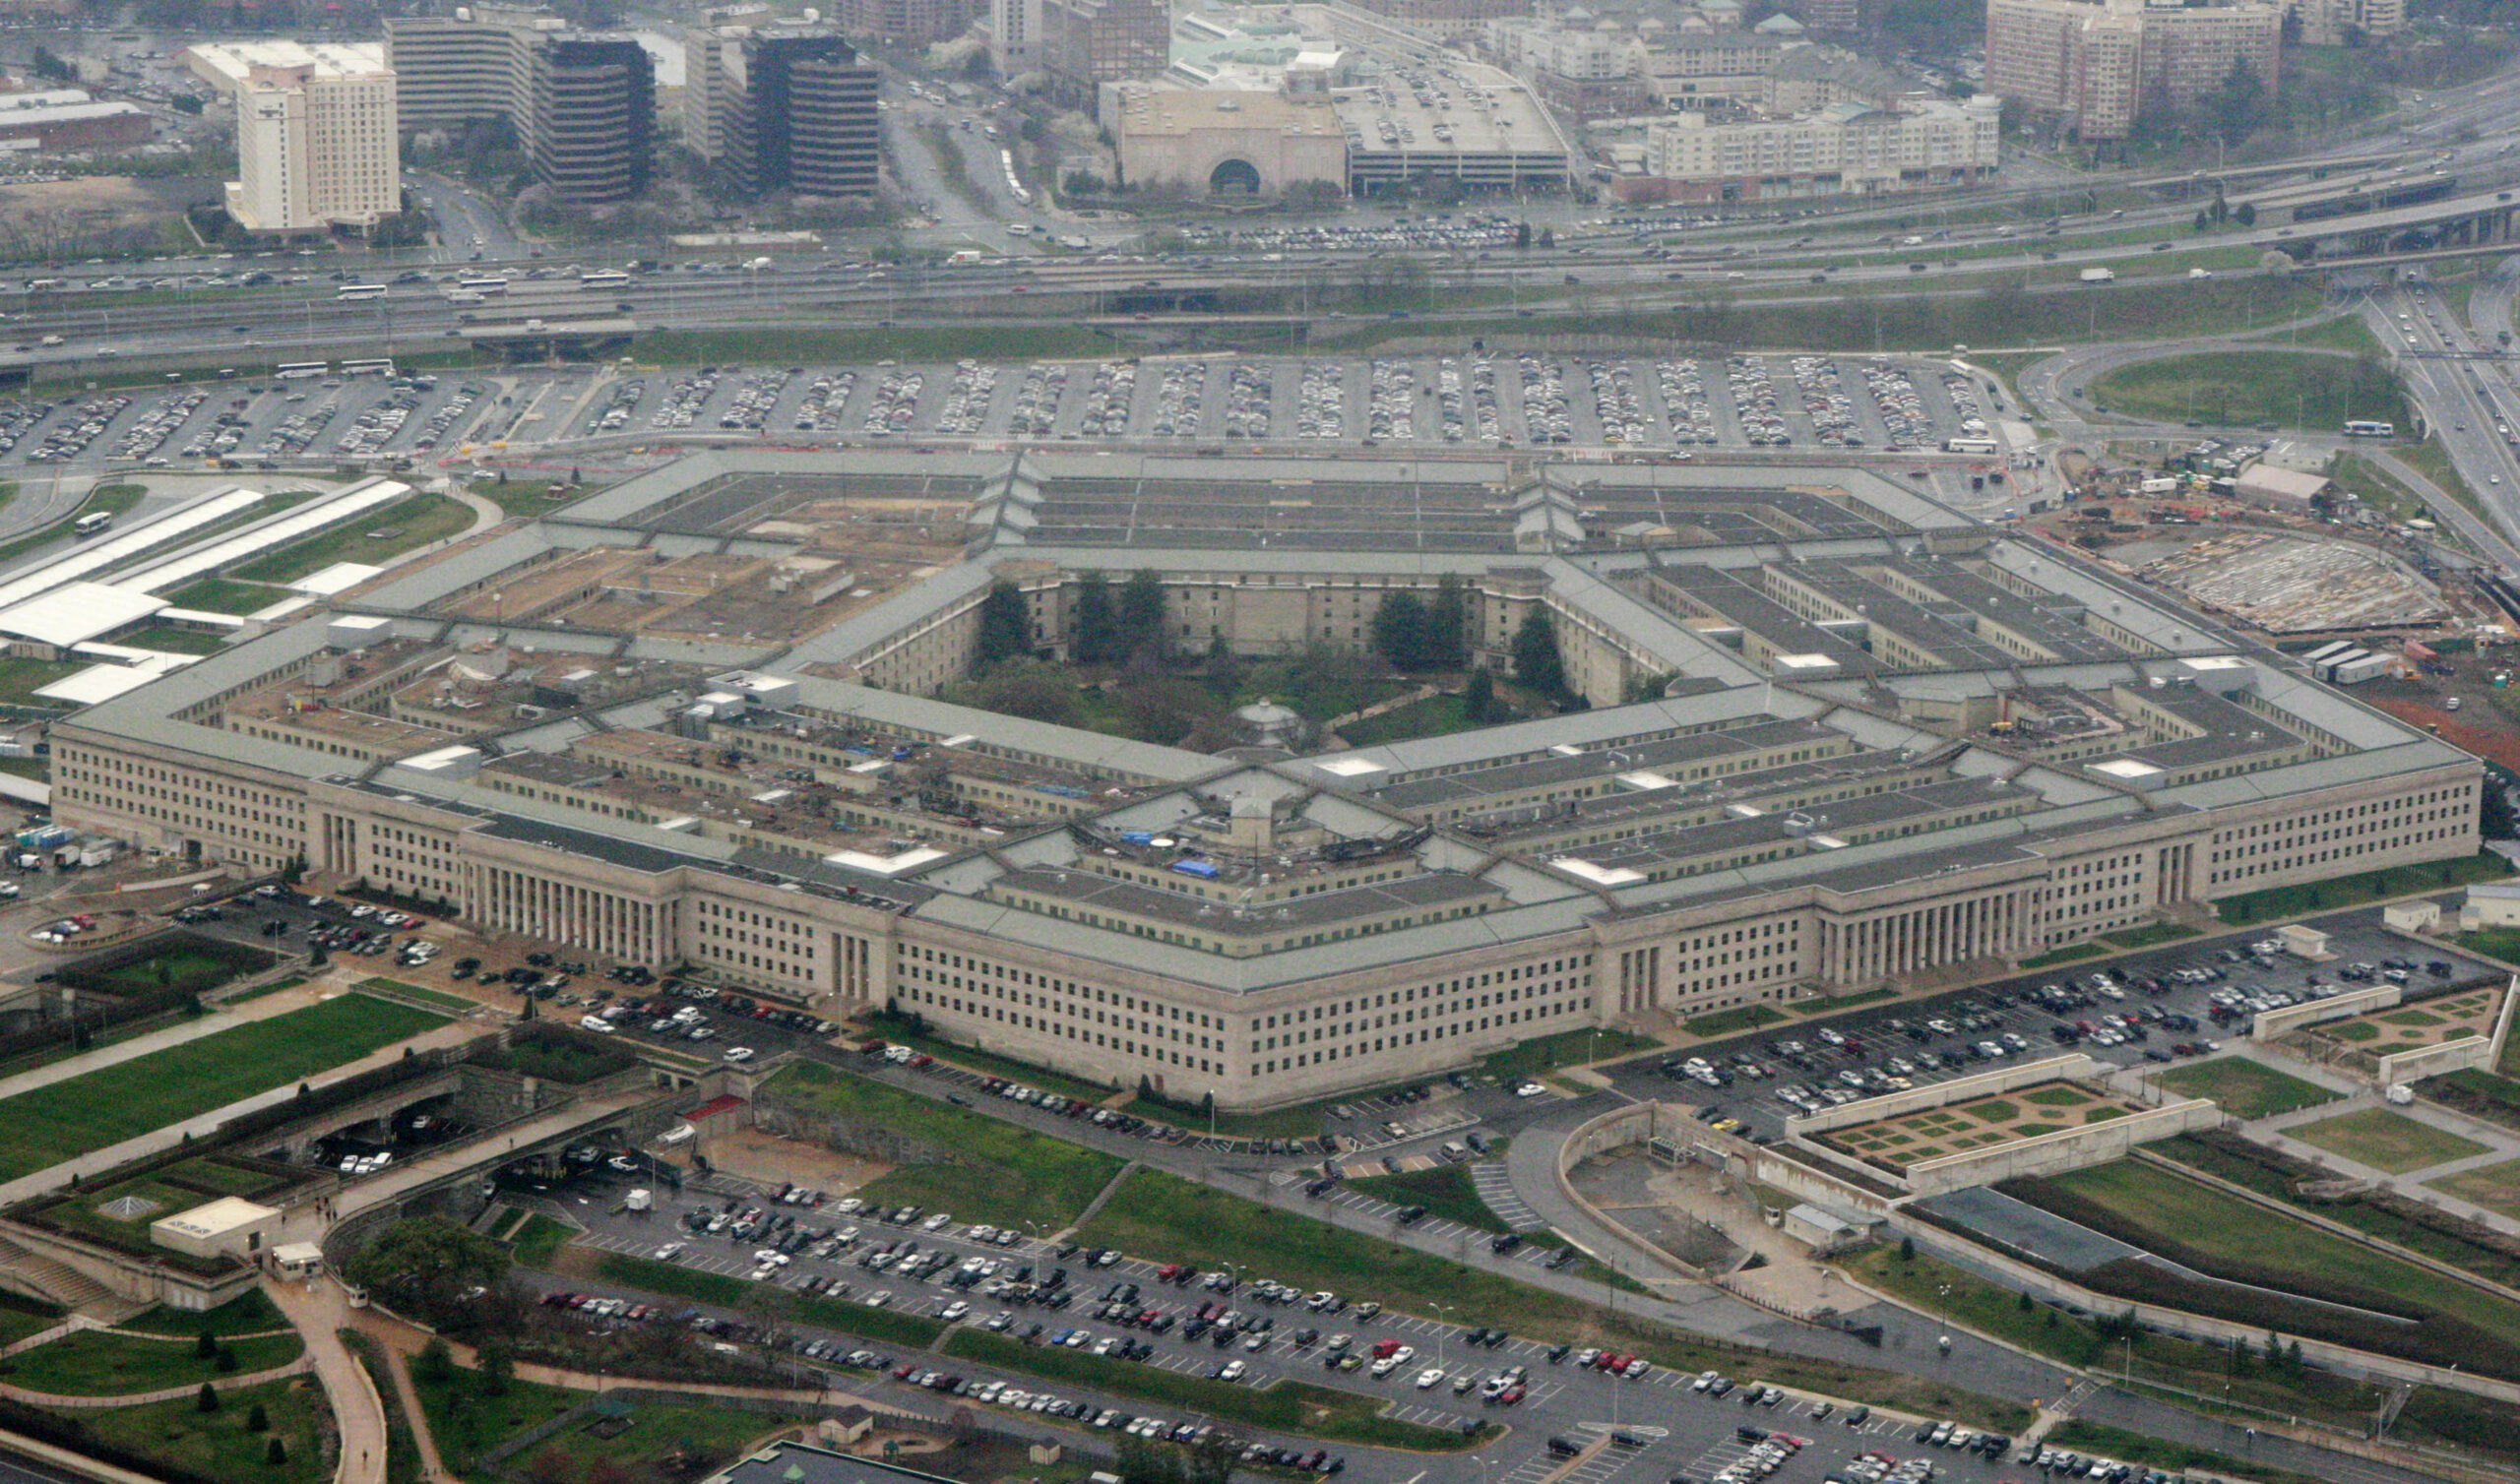 FILE - This March 27, 2008, file photo, shows the Pentagon in Washington. After weeks of wonder by the networking community, the Pentagon has now provided a very terse explanation for why it hired a shadowy company residing at a shared workspace above a Florida bank to manage a colossal, previously idle chunk of the internet that it owns. Many basic questions remain unanswered, beginning with why it chose for the task a company that seems not to have existed until September. The company, Global Resource Systems, has not responded to attempts by The Associated Press to seek comment. (AP Photo/Charles Dharapak, File)